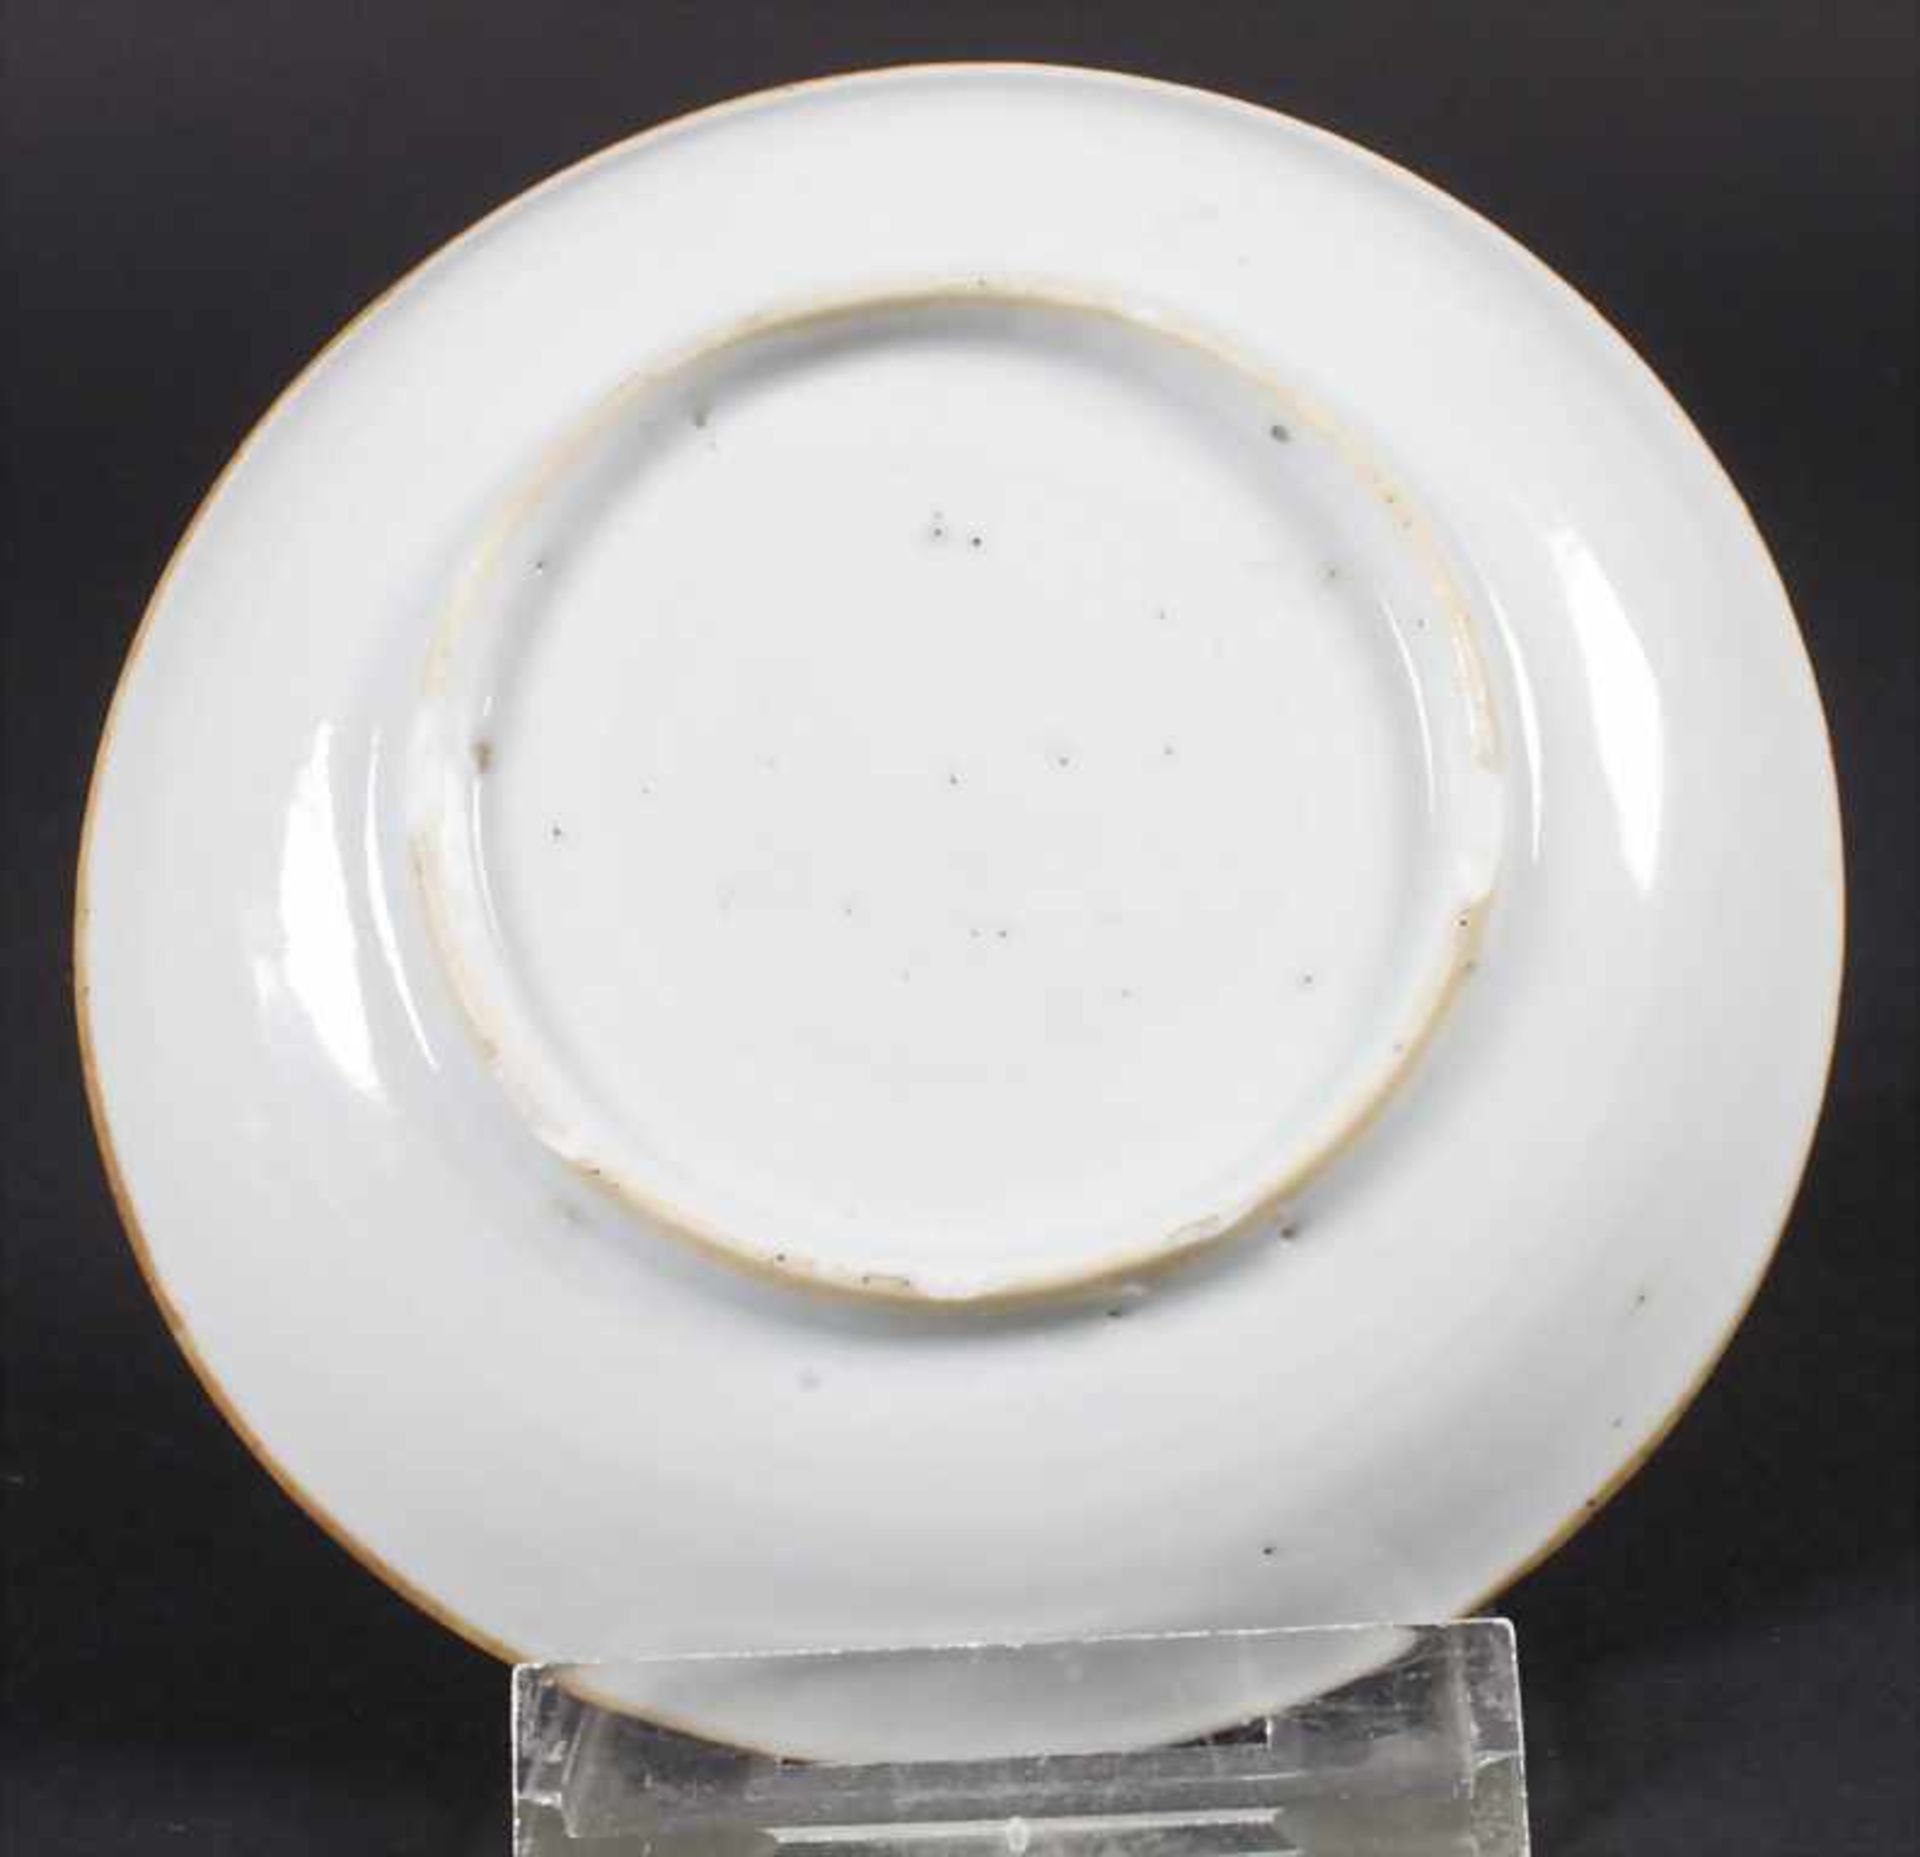 Kumme mit Unterteller / A porcelain bowl with saucer, China, Qing-Dynastie (1644-1911), wohl 18. - Image 3 of 6